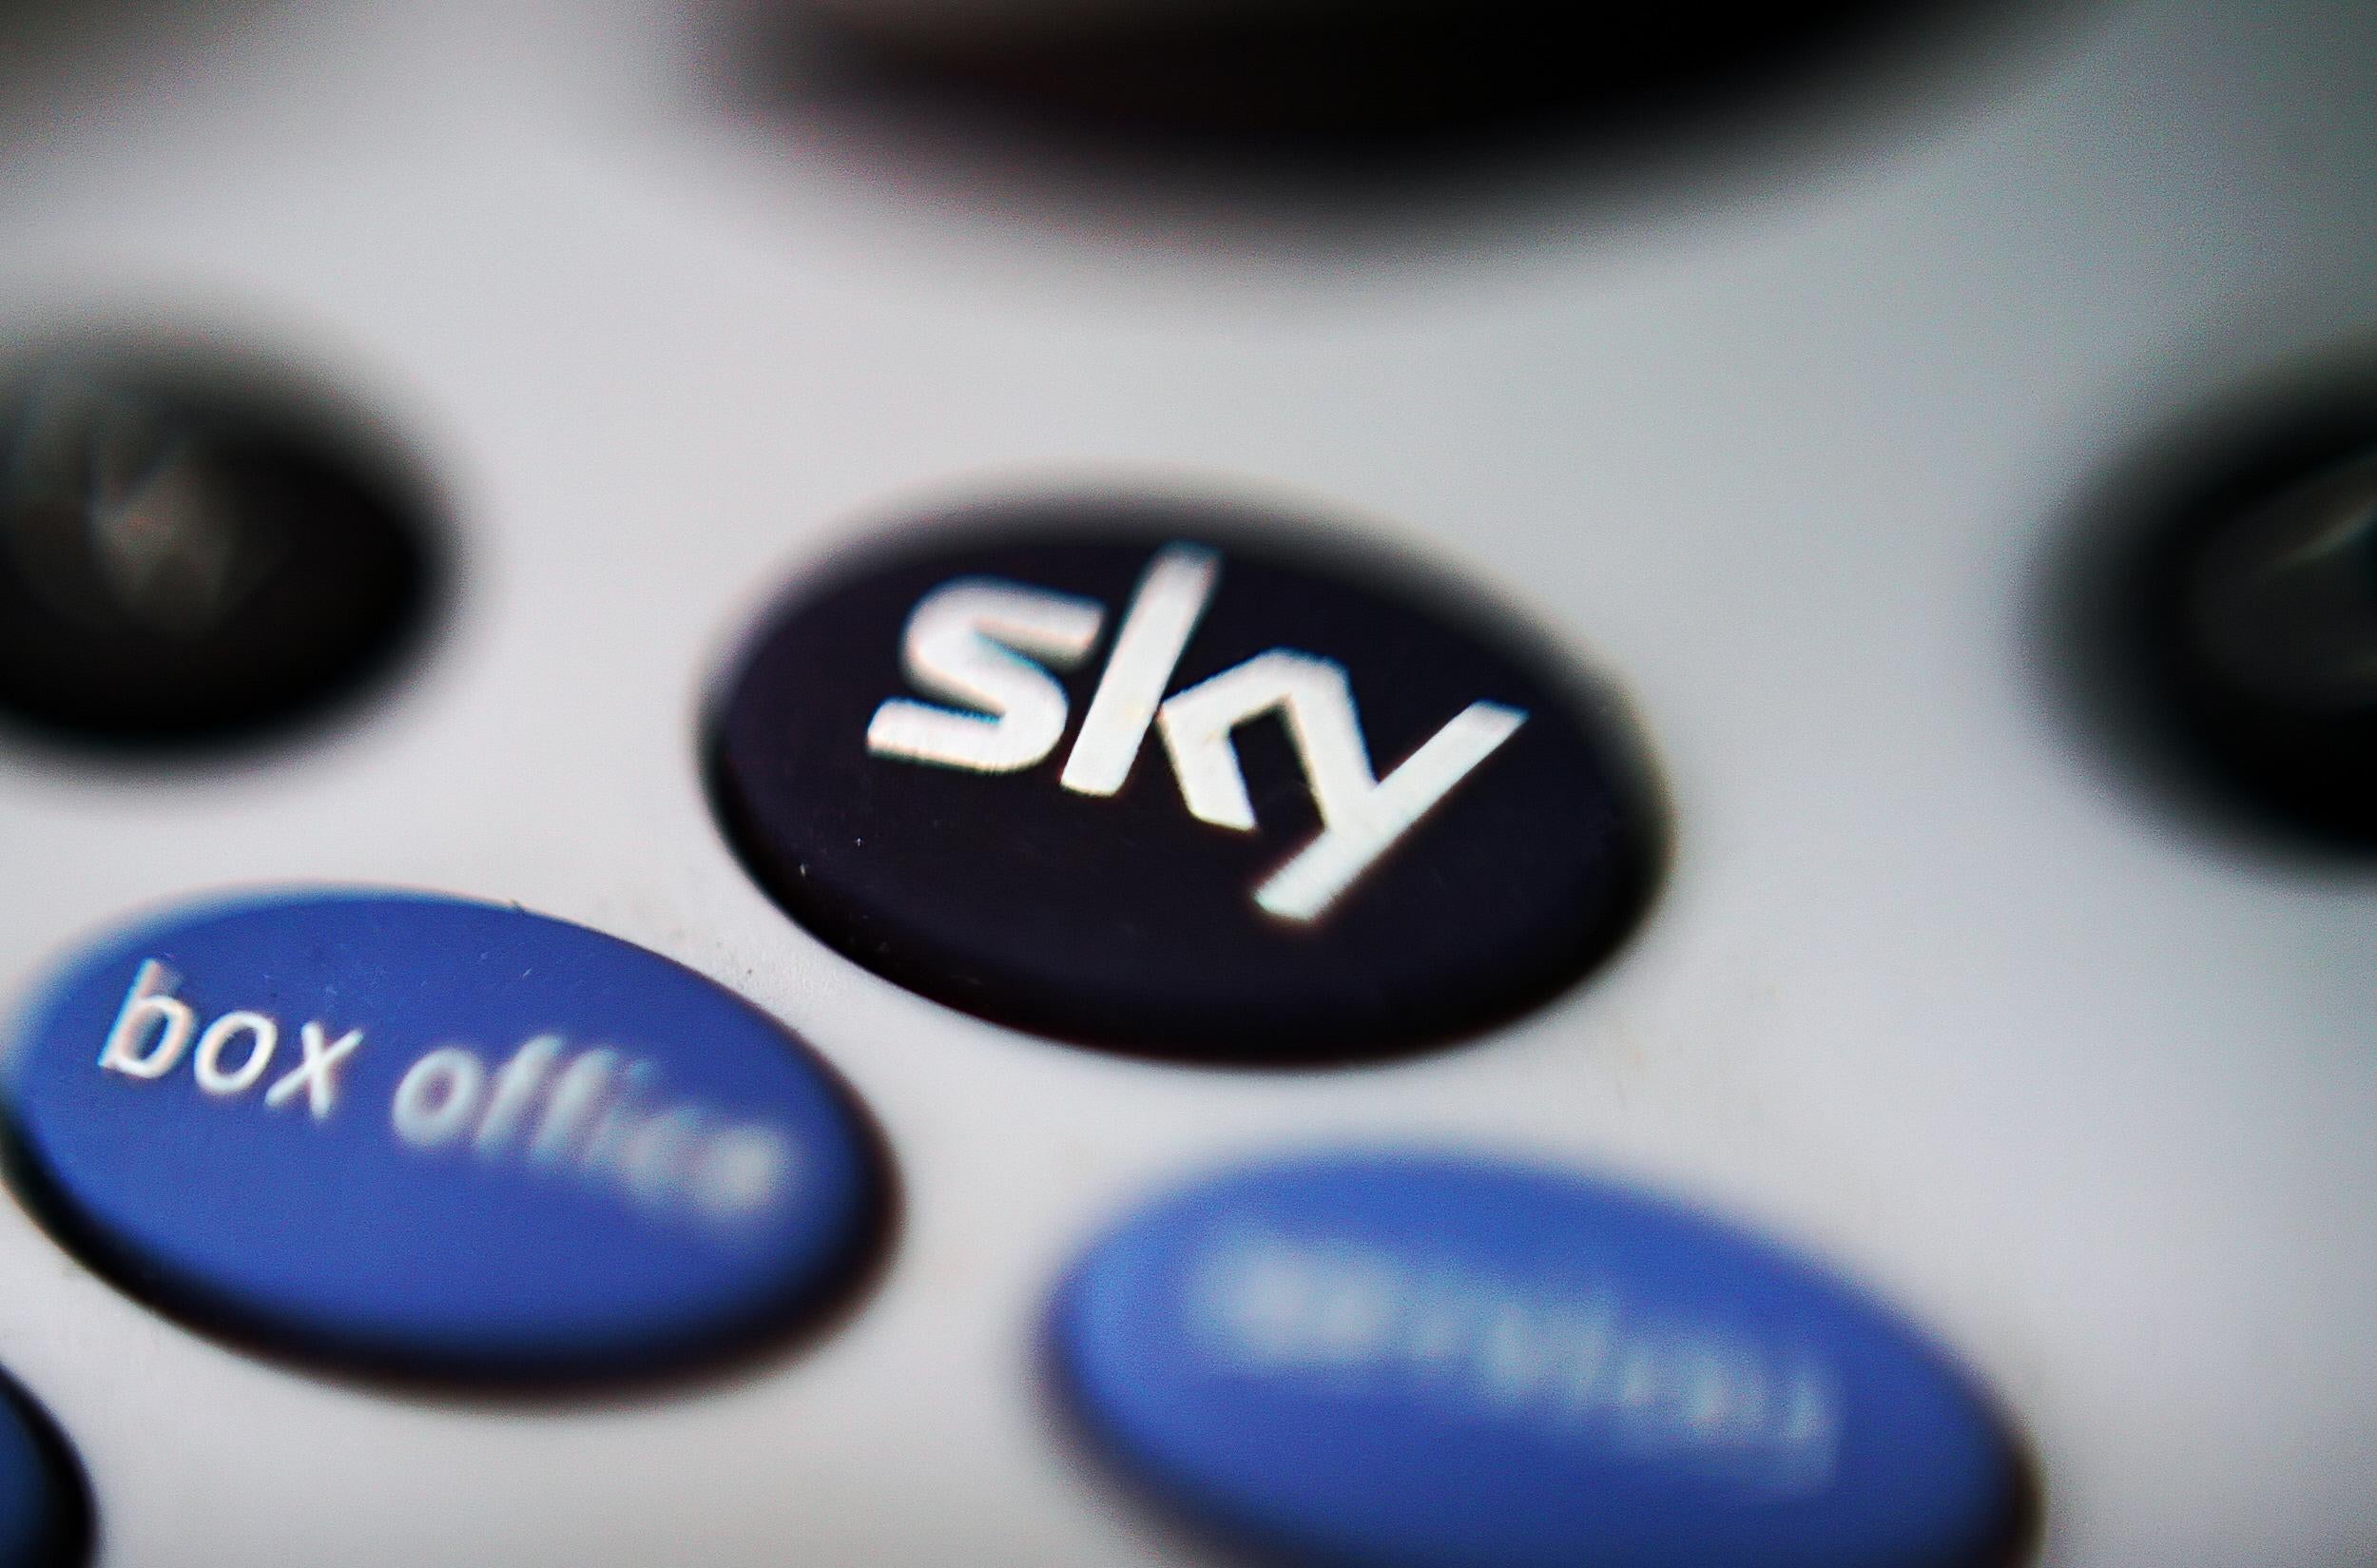 Sky Sports will go up by 50p per month